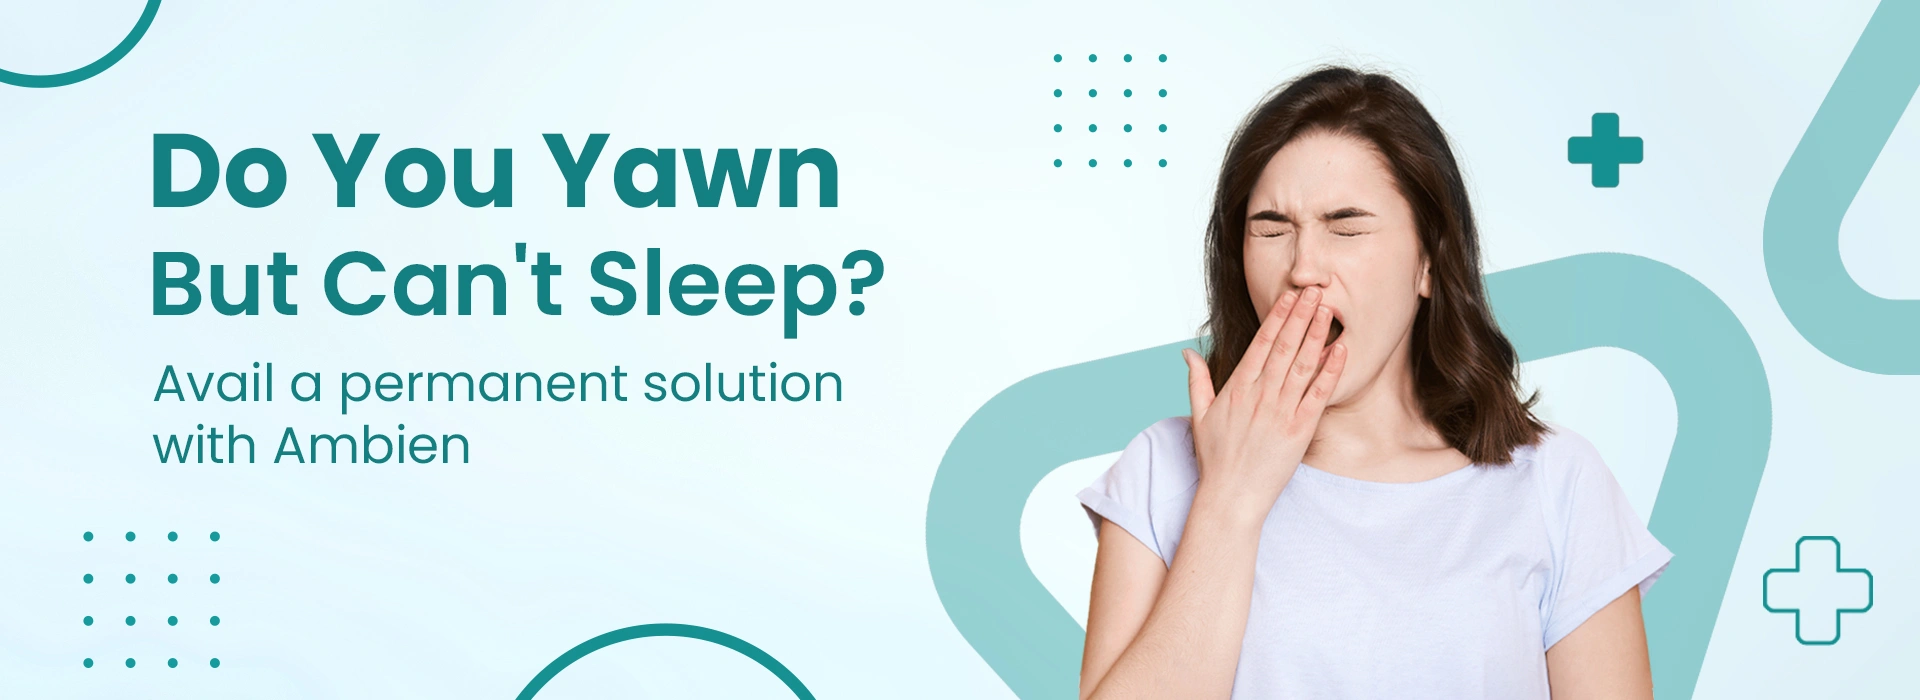 Do you yawn but can't sleep?